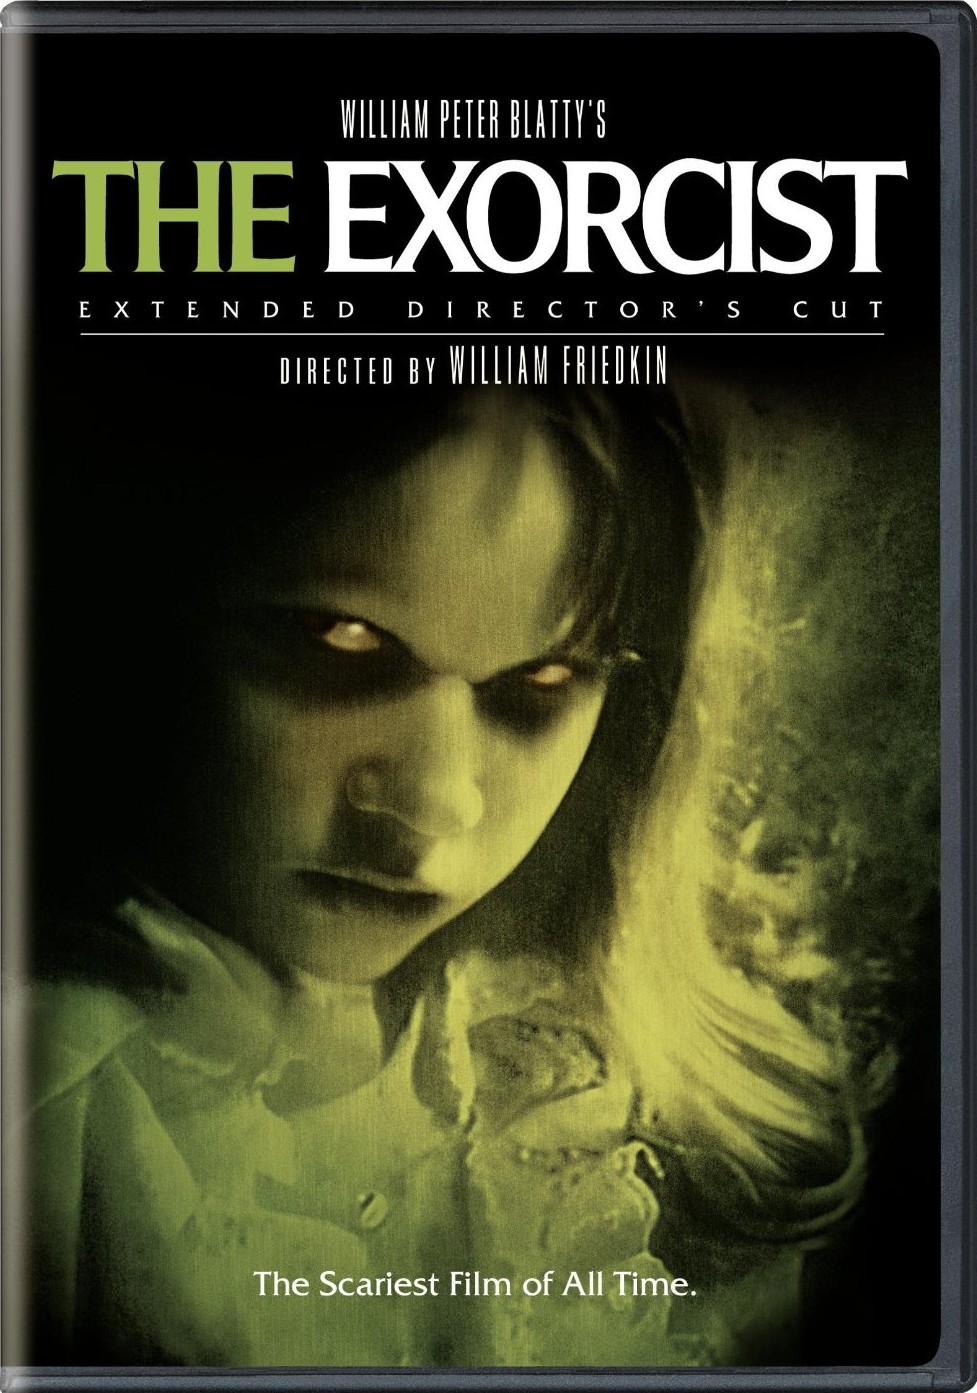 the exorcist 1973 full movie download